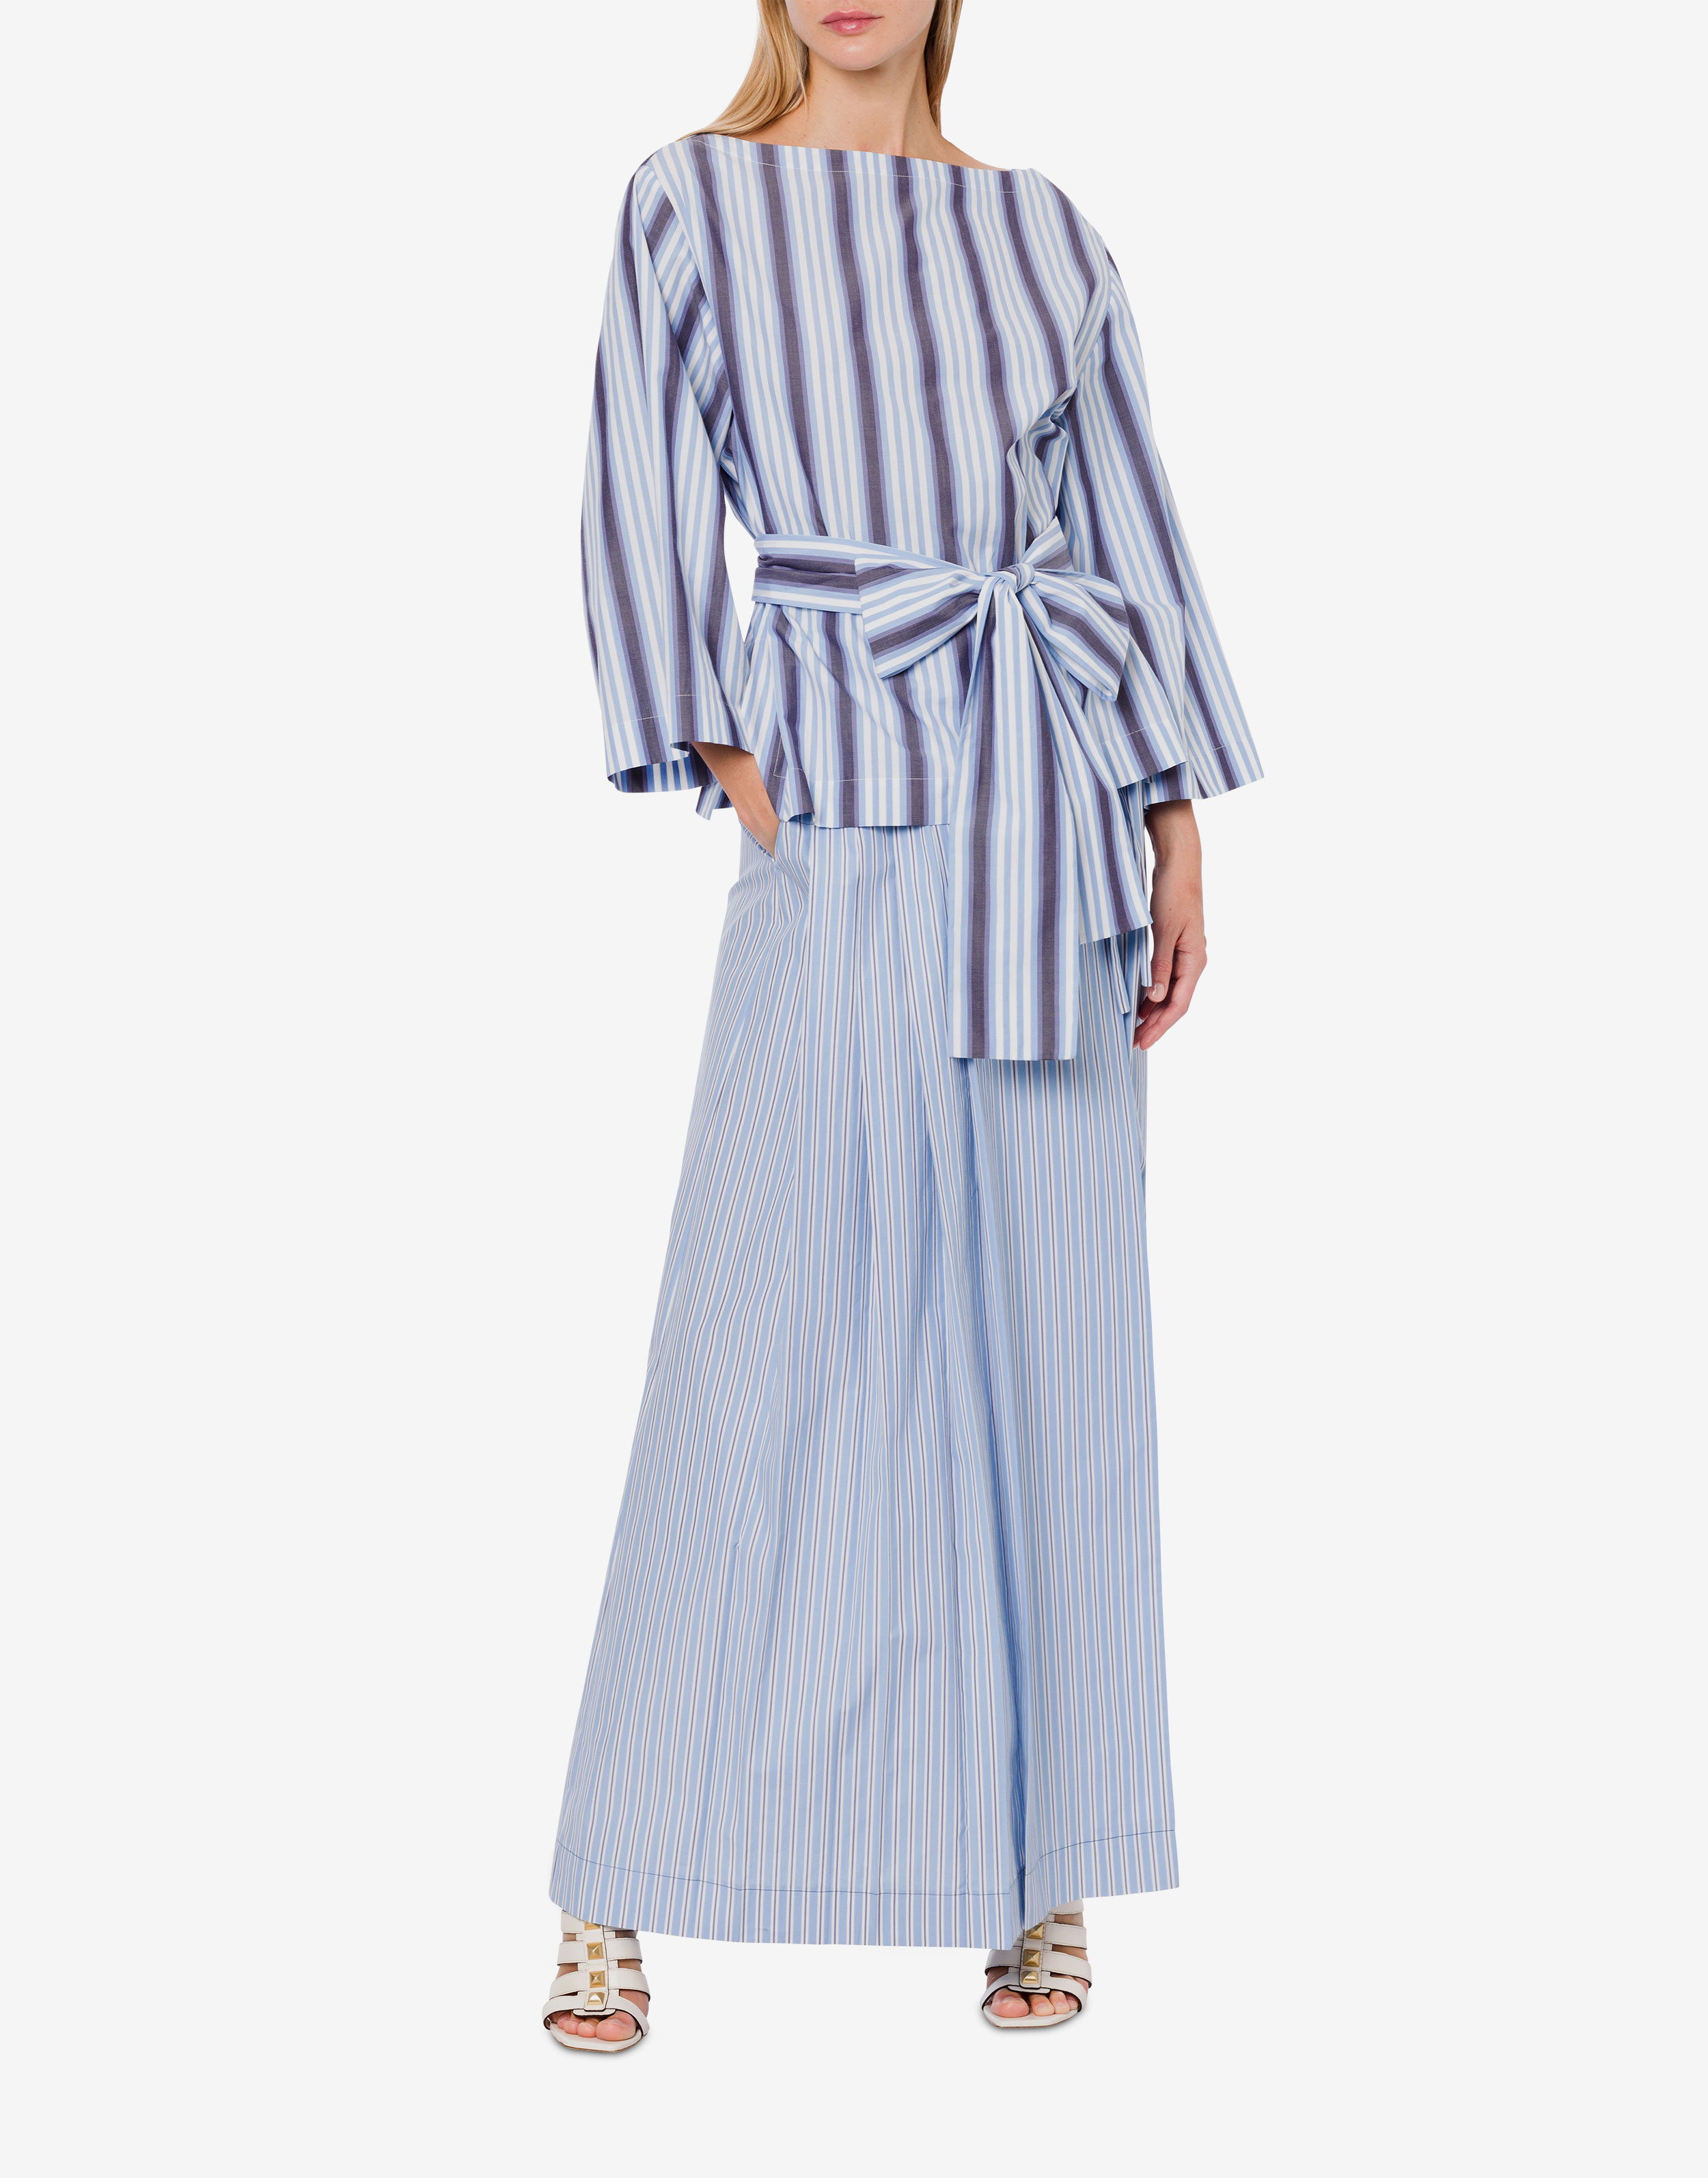 Blouse in striped poplin with sash